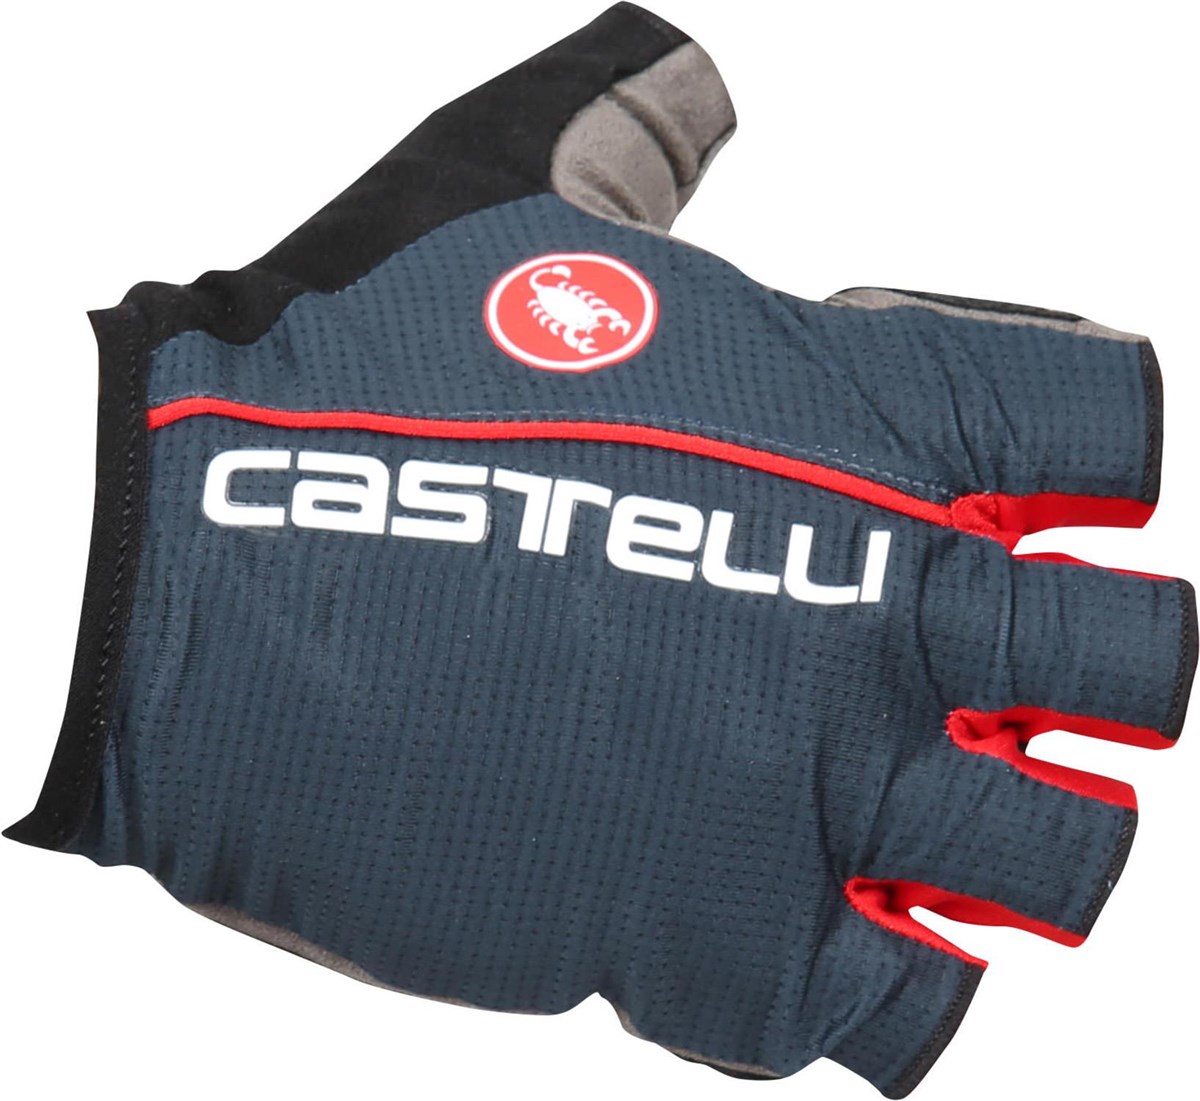 Castelli Circuito Short Finger Cycling Gloves